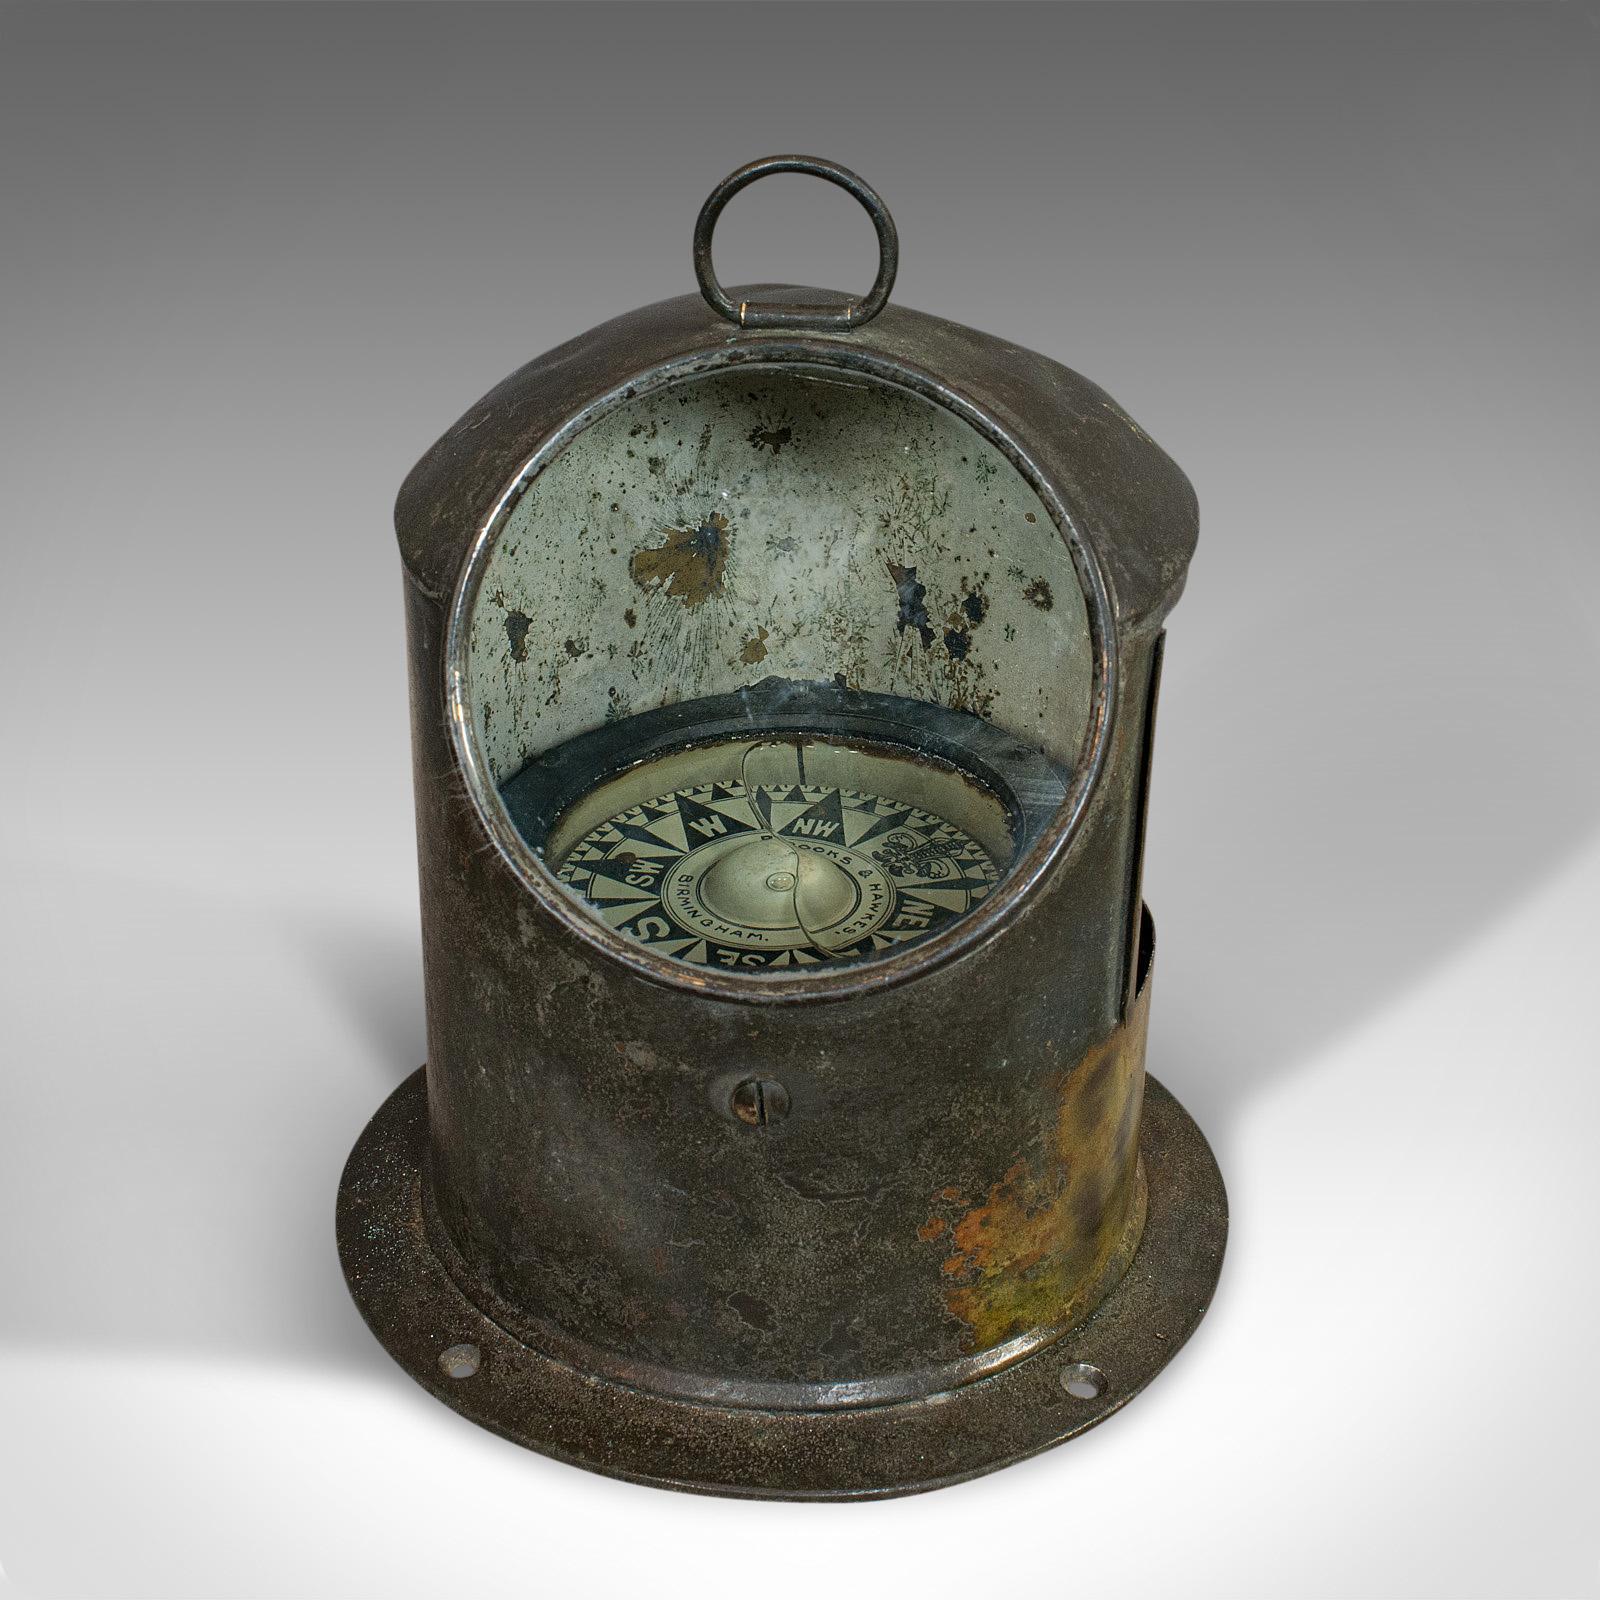 This is a vintage binnacle compass. An English, brass maritime navigation instrument, dating to the early 20th century, circa 1930.

Fascinating maritime instrument
Displays a desirable aged patina
Weathered brass commensurate with age - one